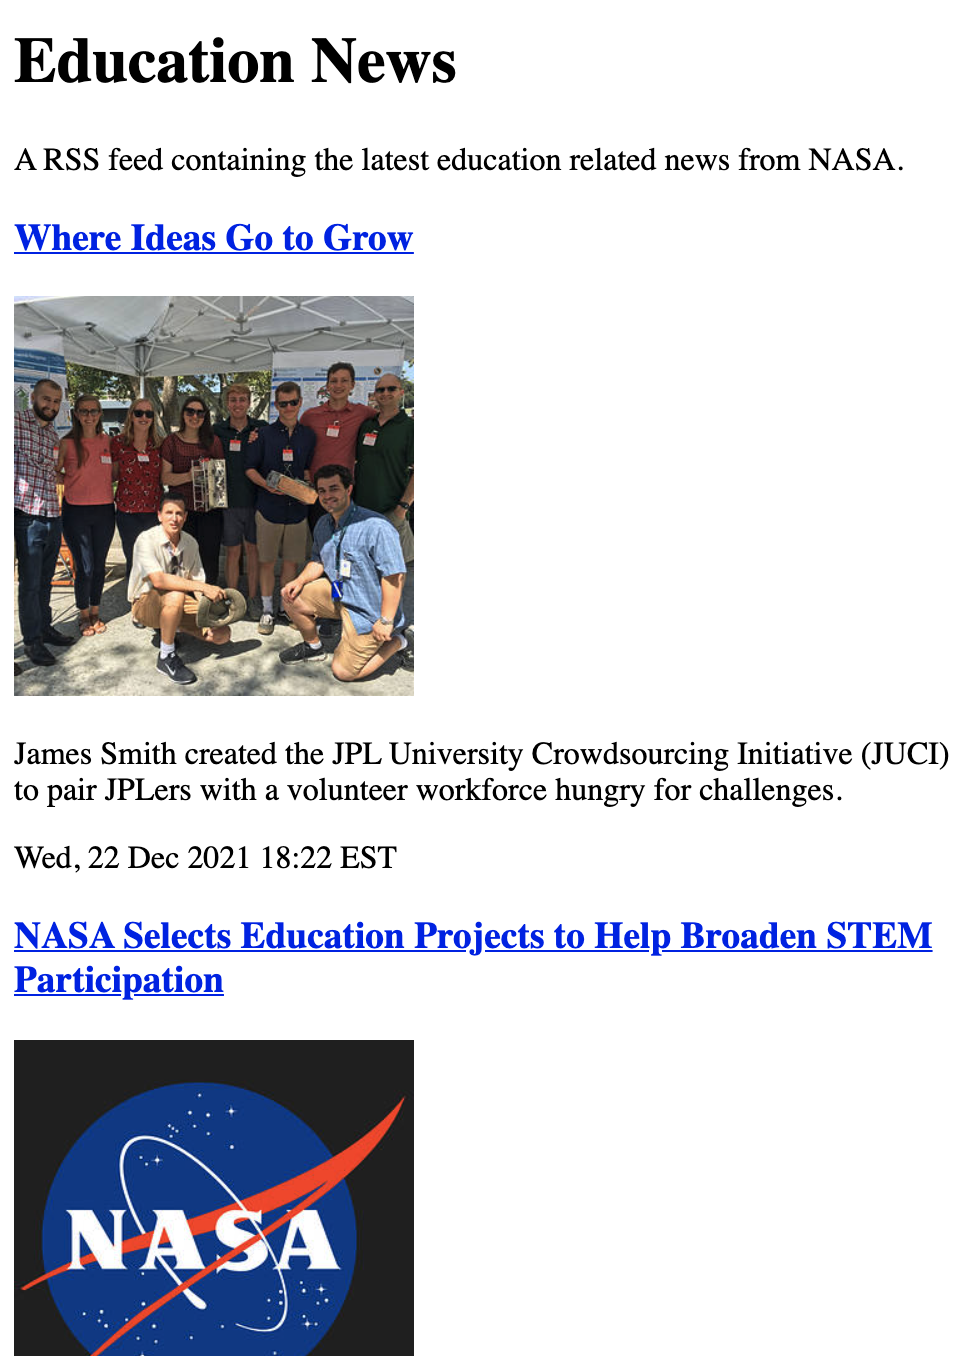 Image of a partial email, titled "Education News". The email contains content from NASA's Education News RSS feed. Beneath the title is a description reading: "A RSS news feed containing the latest education related news from NASA." Below are a series of recent education stories each with title, link, image, summary paragraph, and timestamp